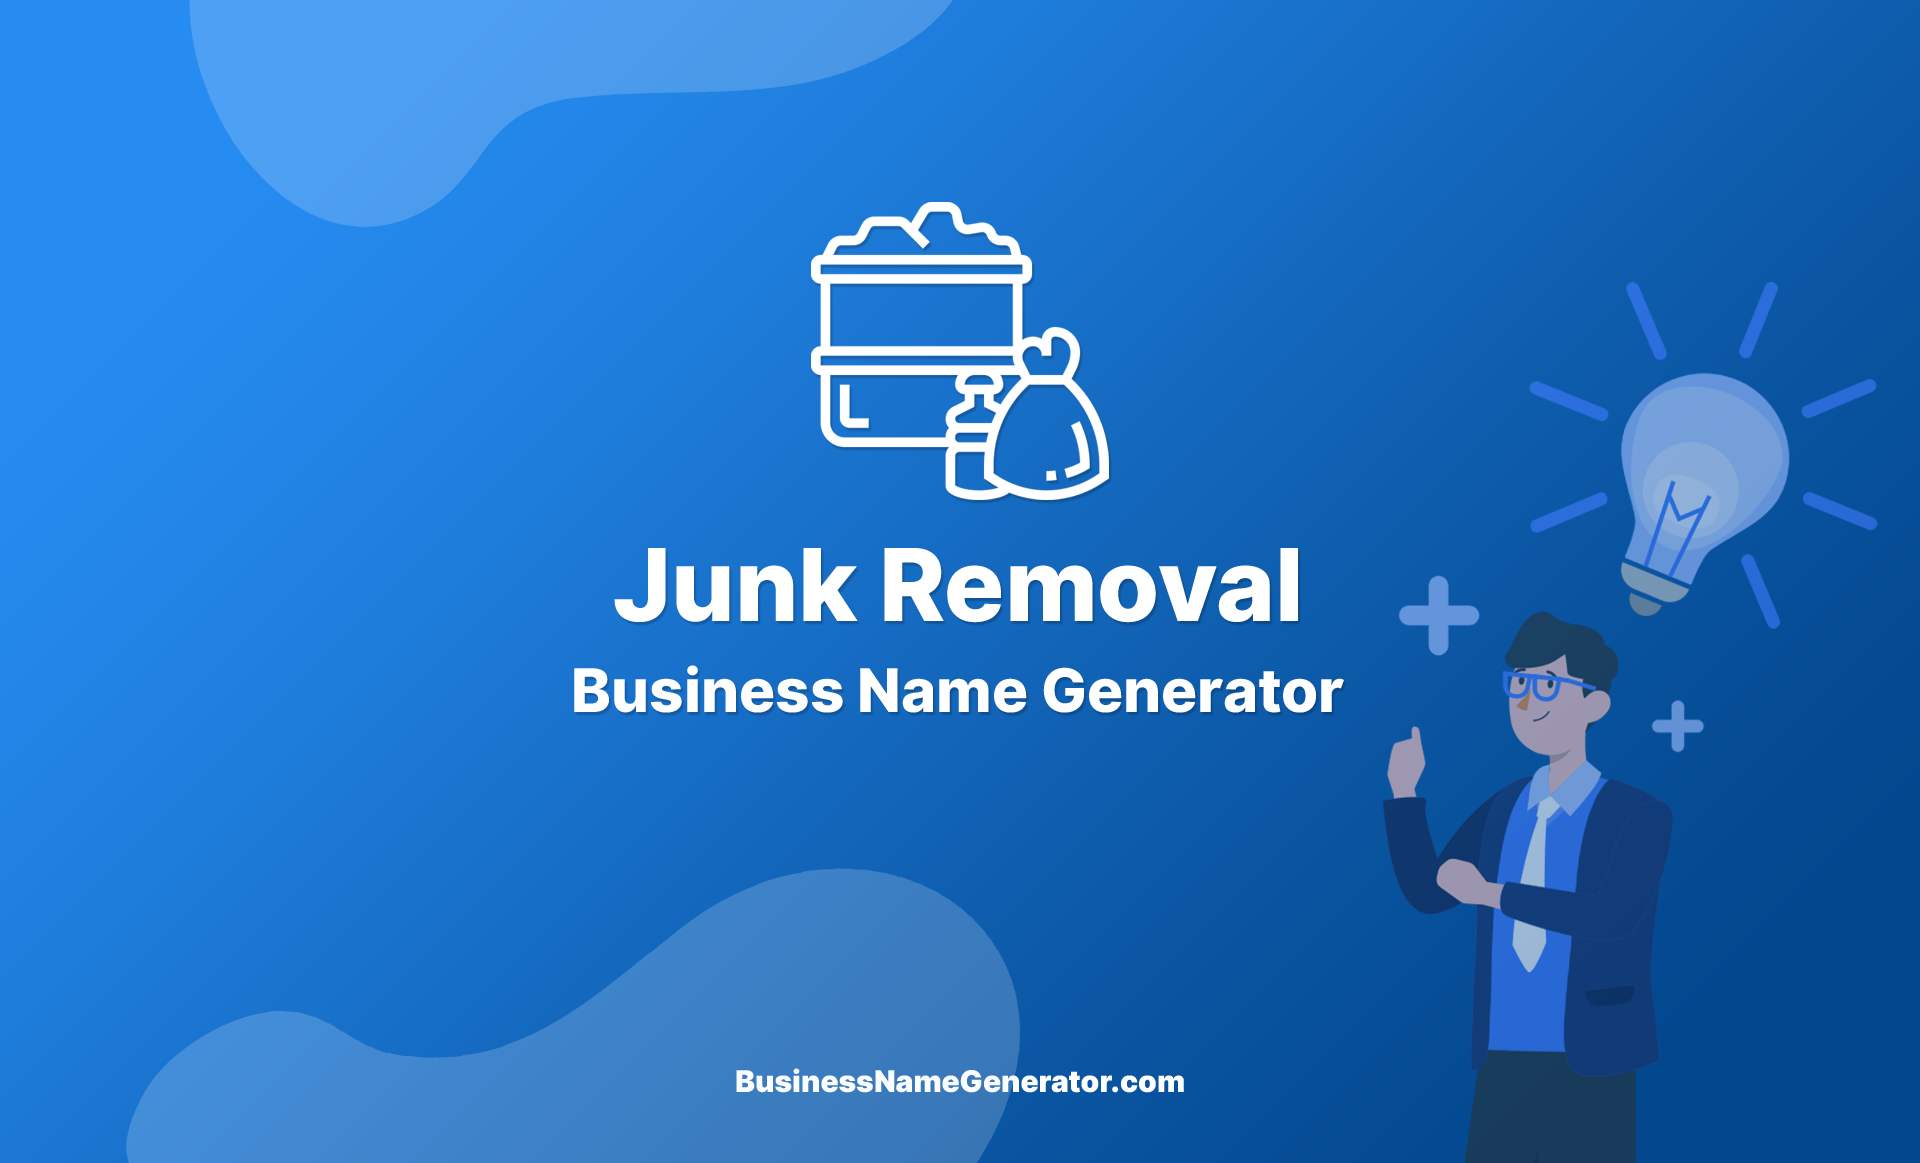 Junk Removal Business Name Generator